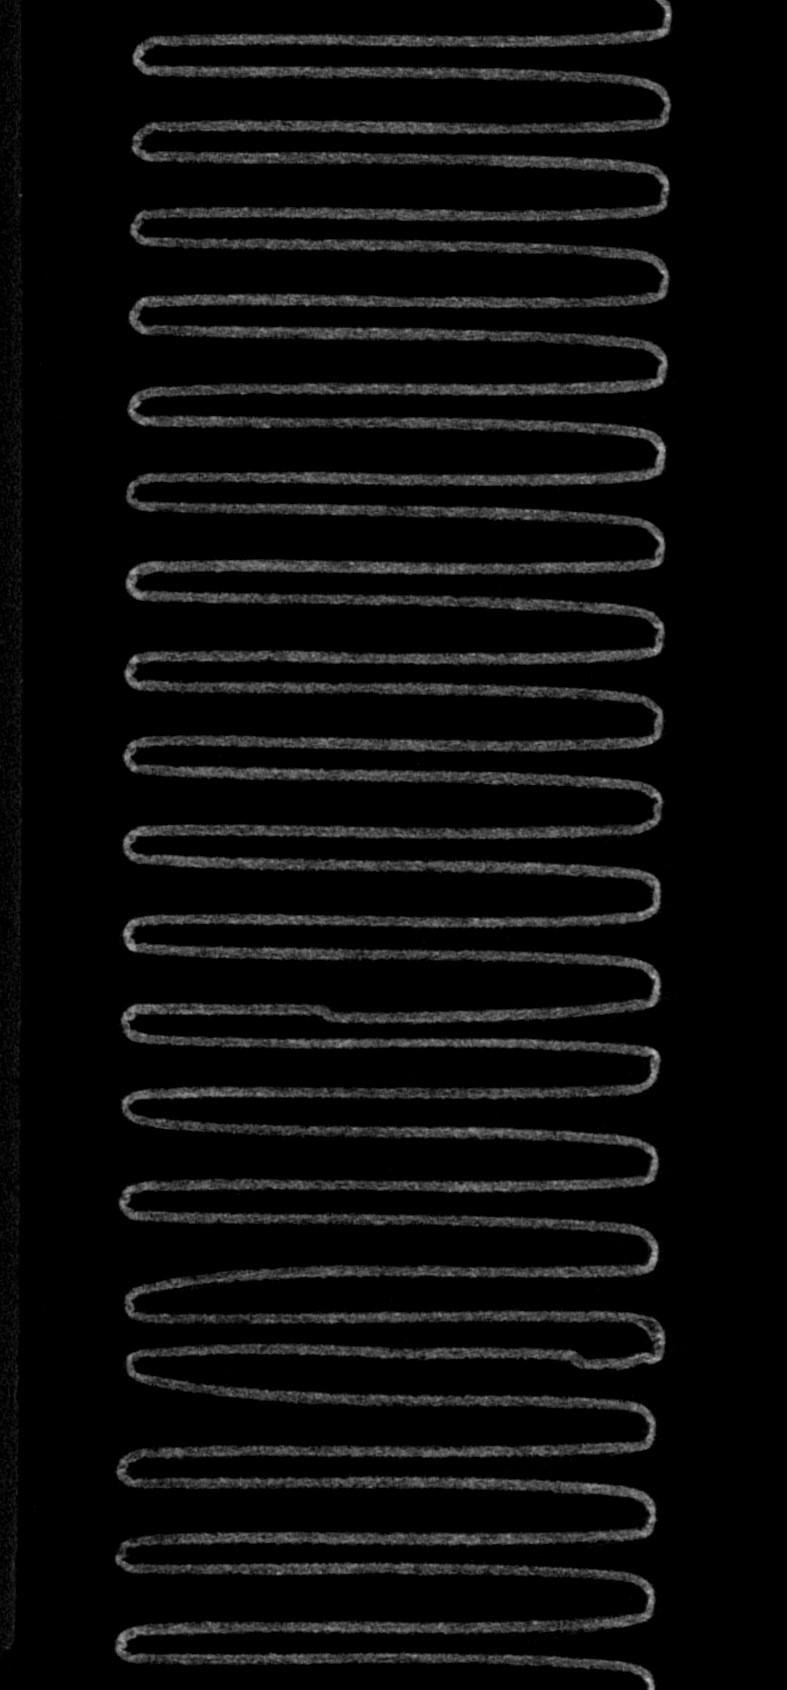 Scan of a new, clean air filter showing the filter insert folded details